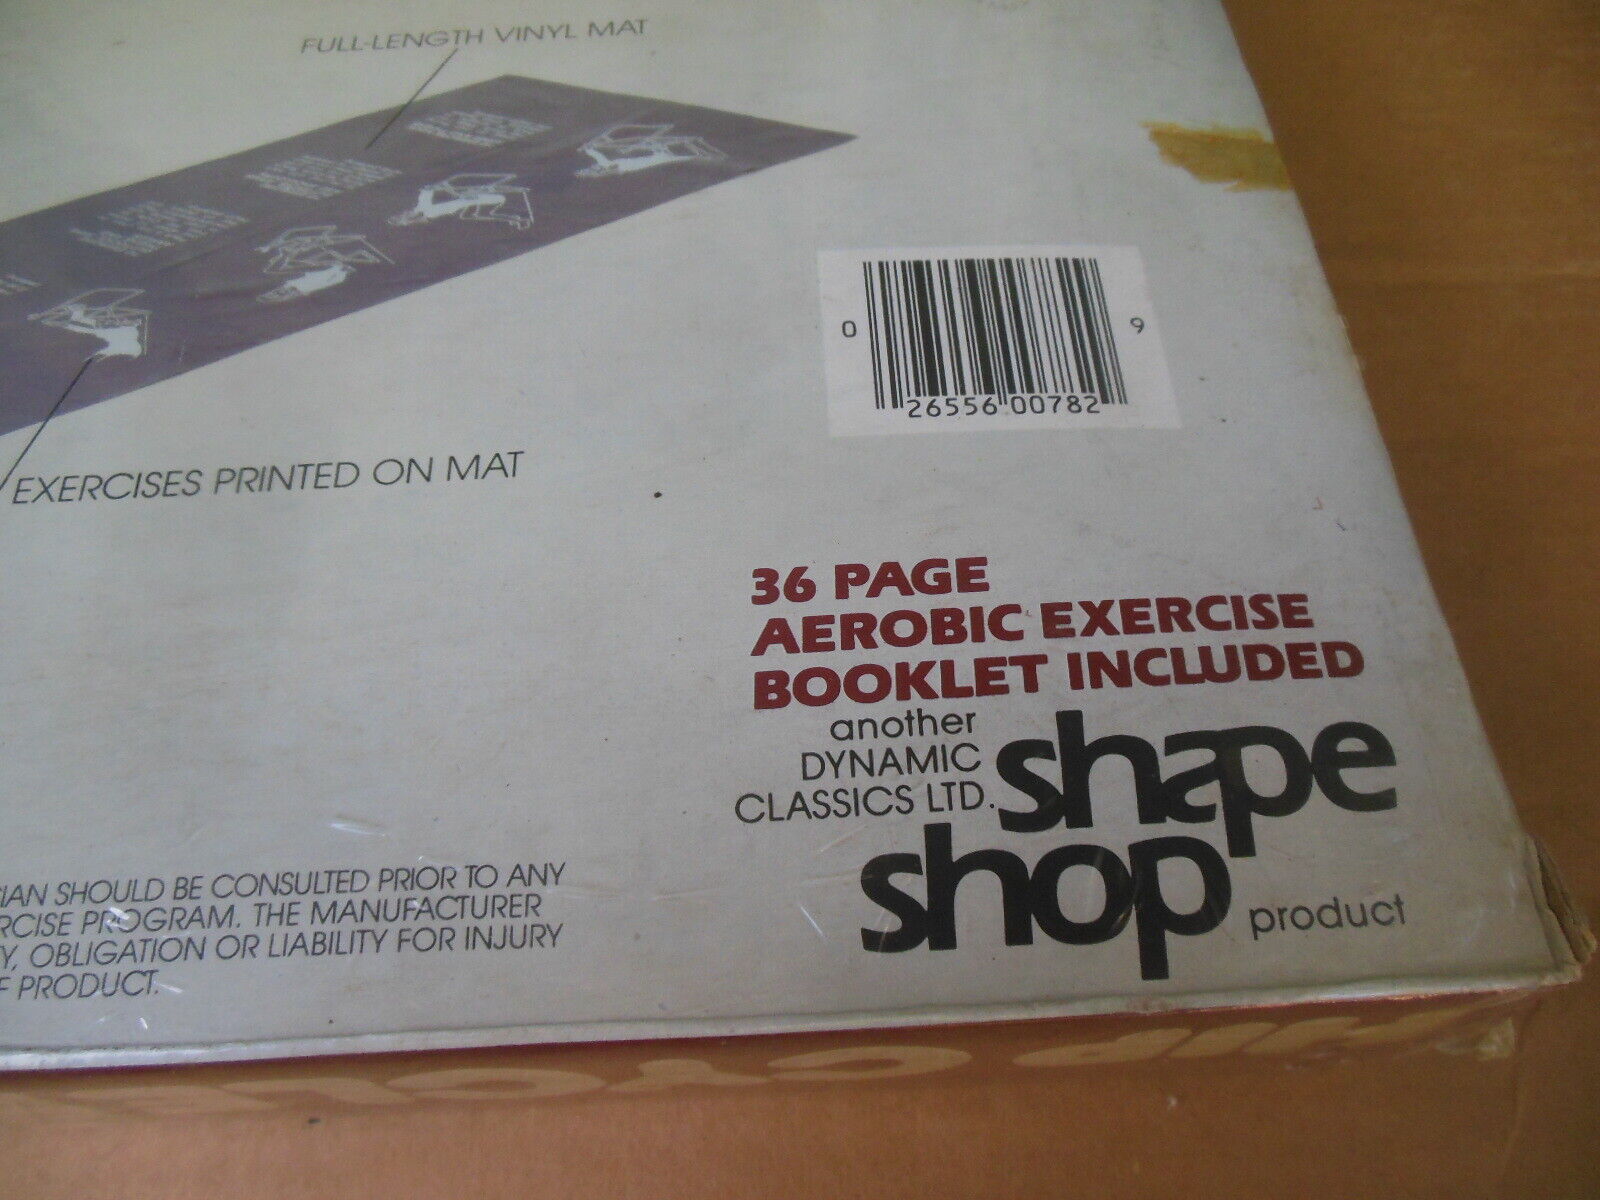 Vintage 80s Fitness Exercise Machine Shape Shop Hip Cycle Sealed in Box